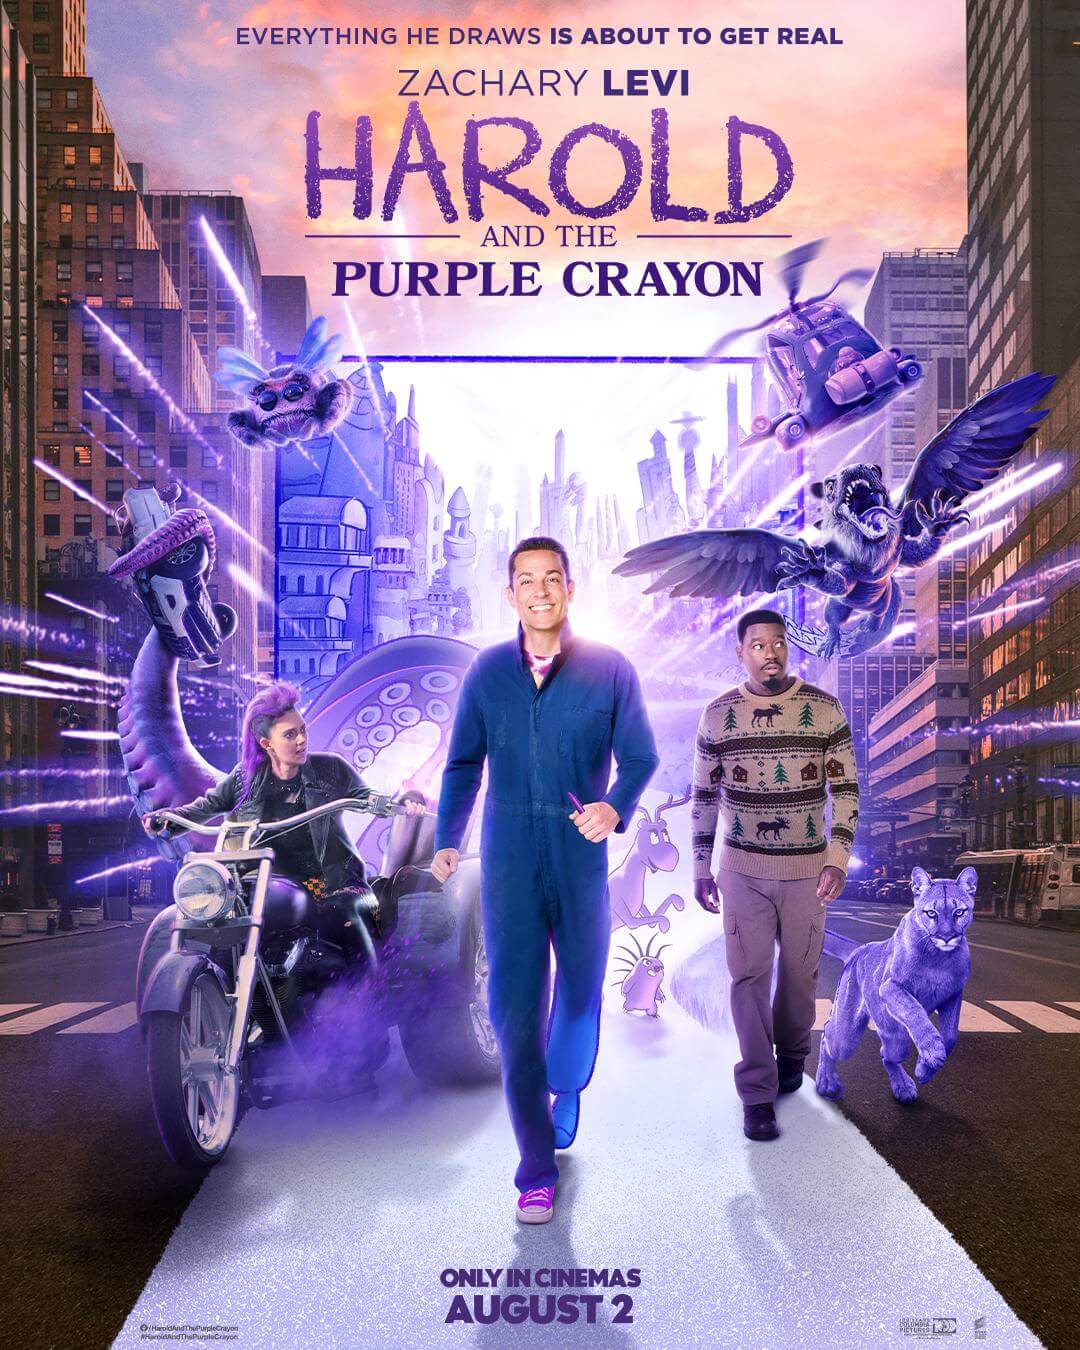 Watch trailer for Harold and Purple Crayon